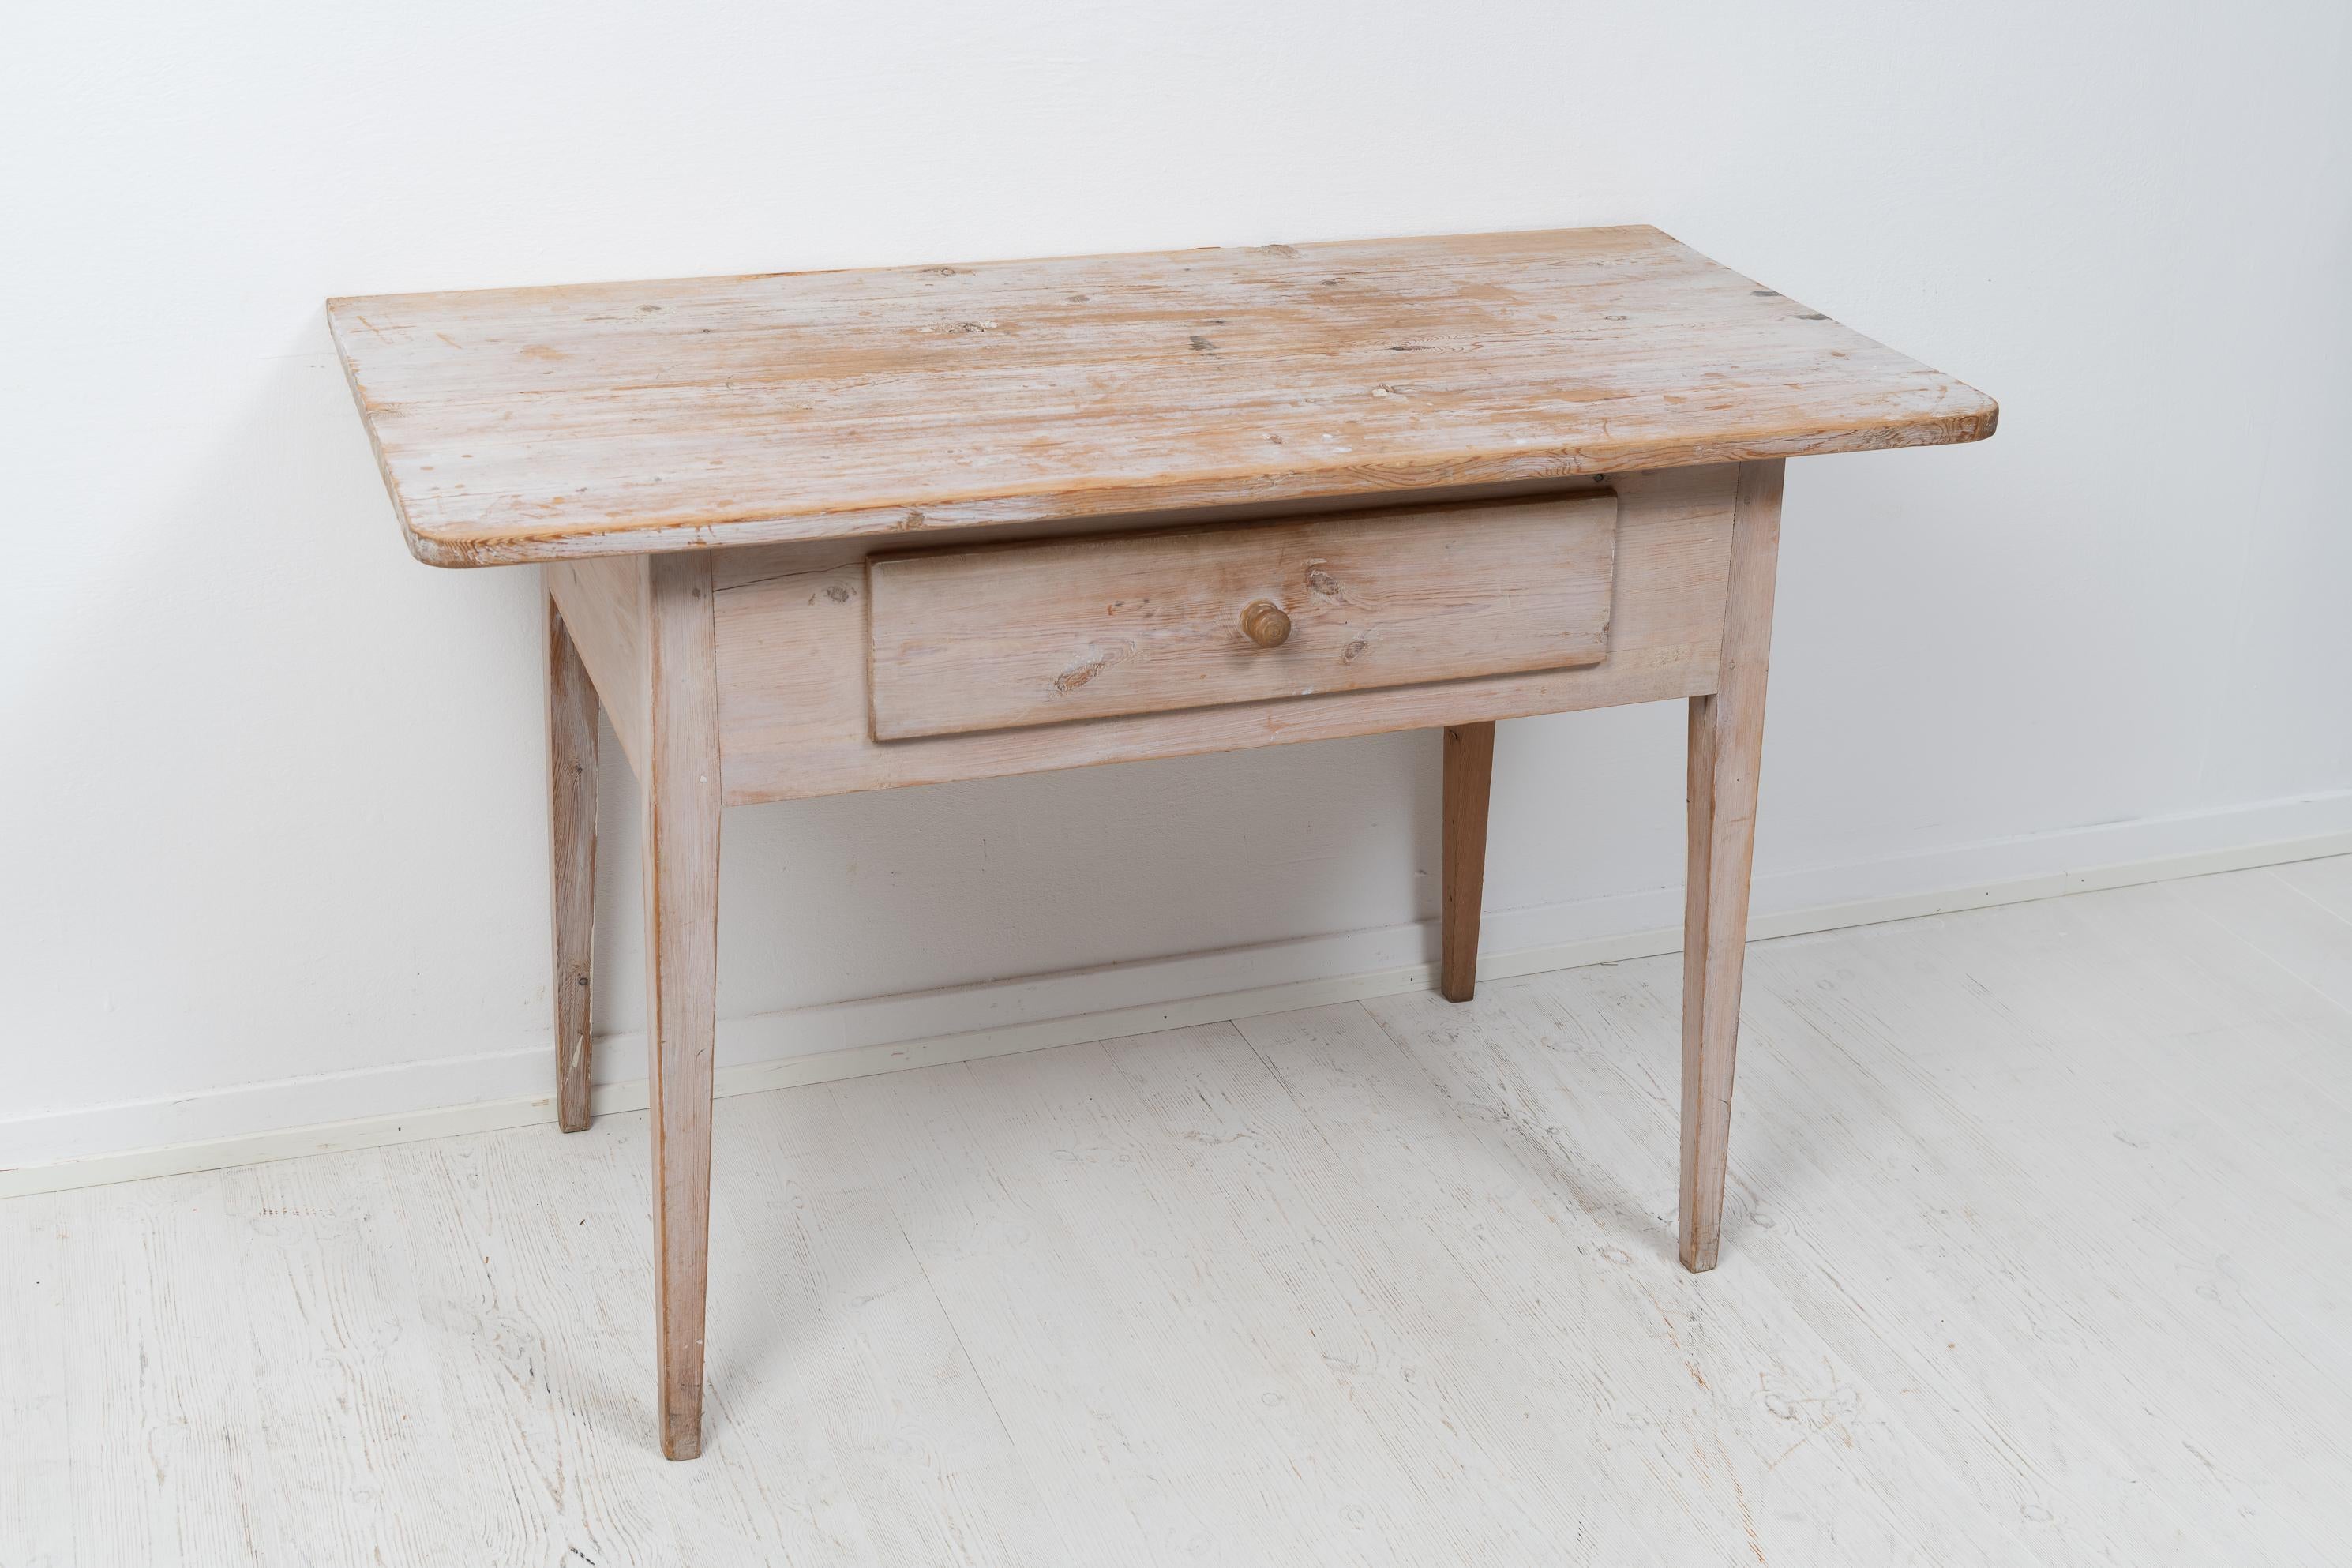 Genuine Antique Swedish Handmade Folk Art Pine Rustic Table with Drawer For Sale 4